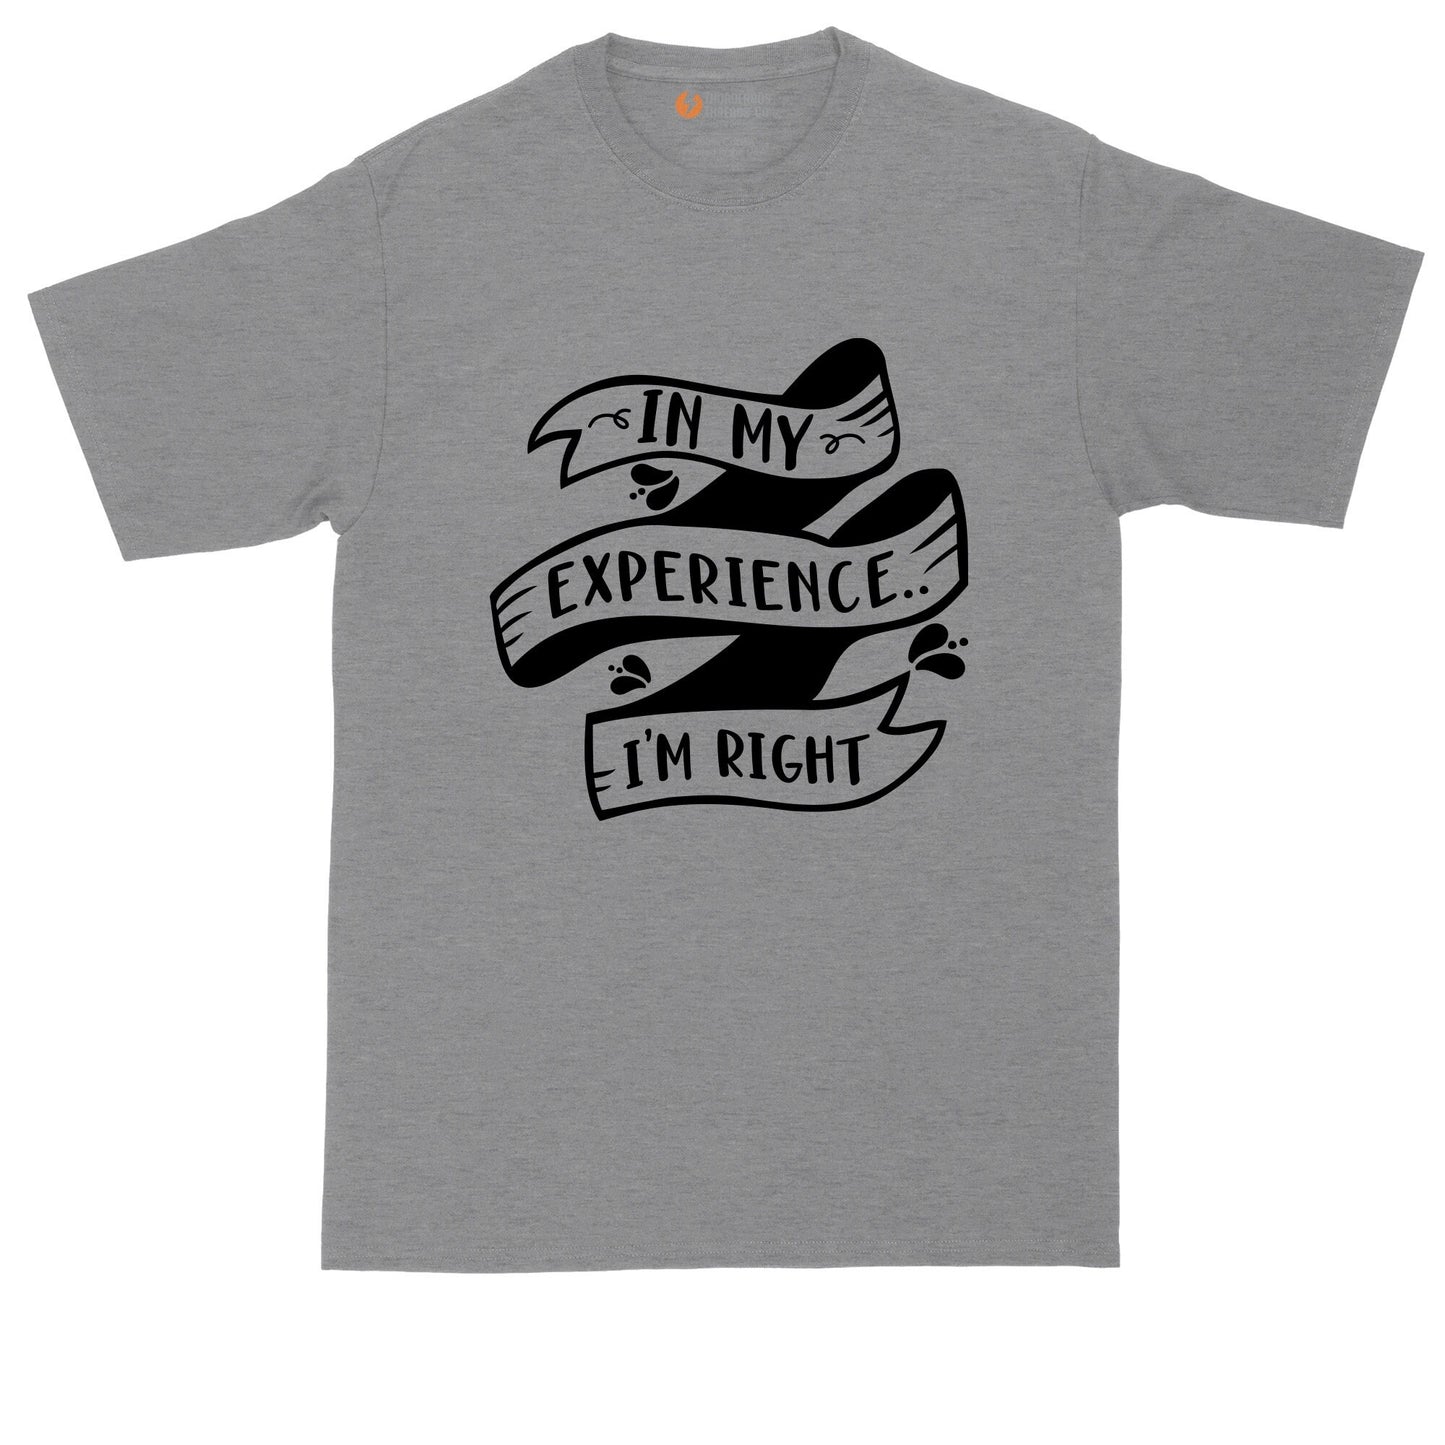 In My Experience I'm Right | Big and Tall Mens T-Shirt | Funny T-Shirt | Graphic T-Shirt